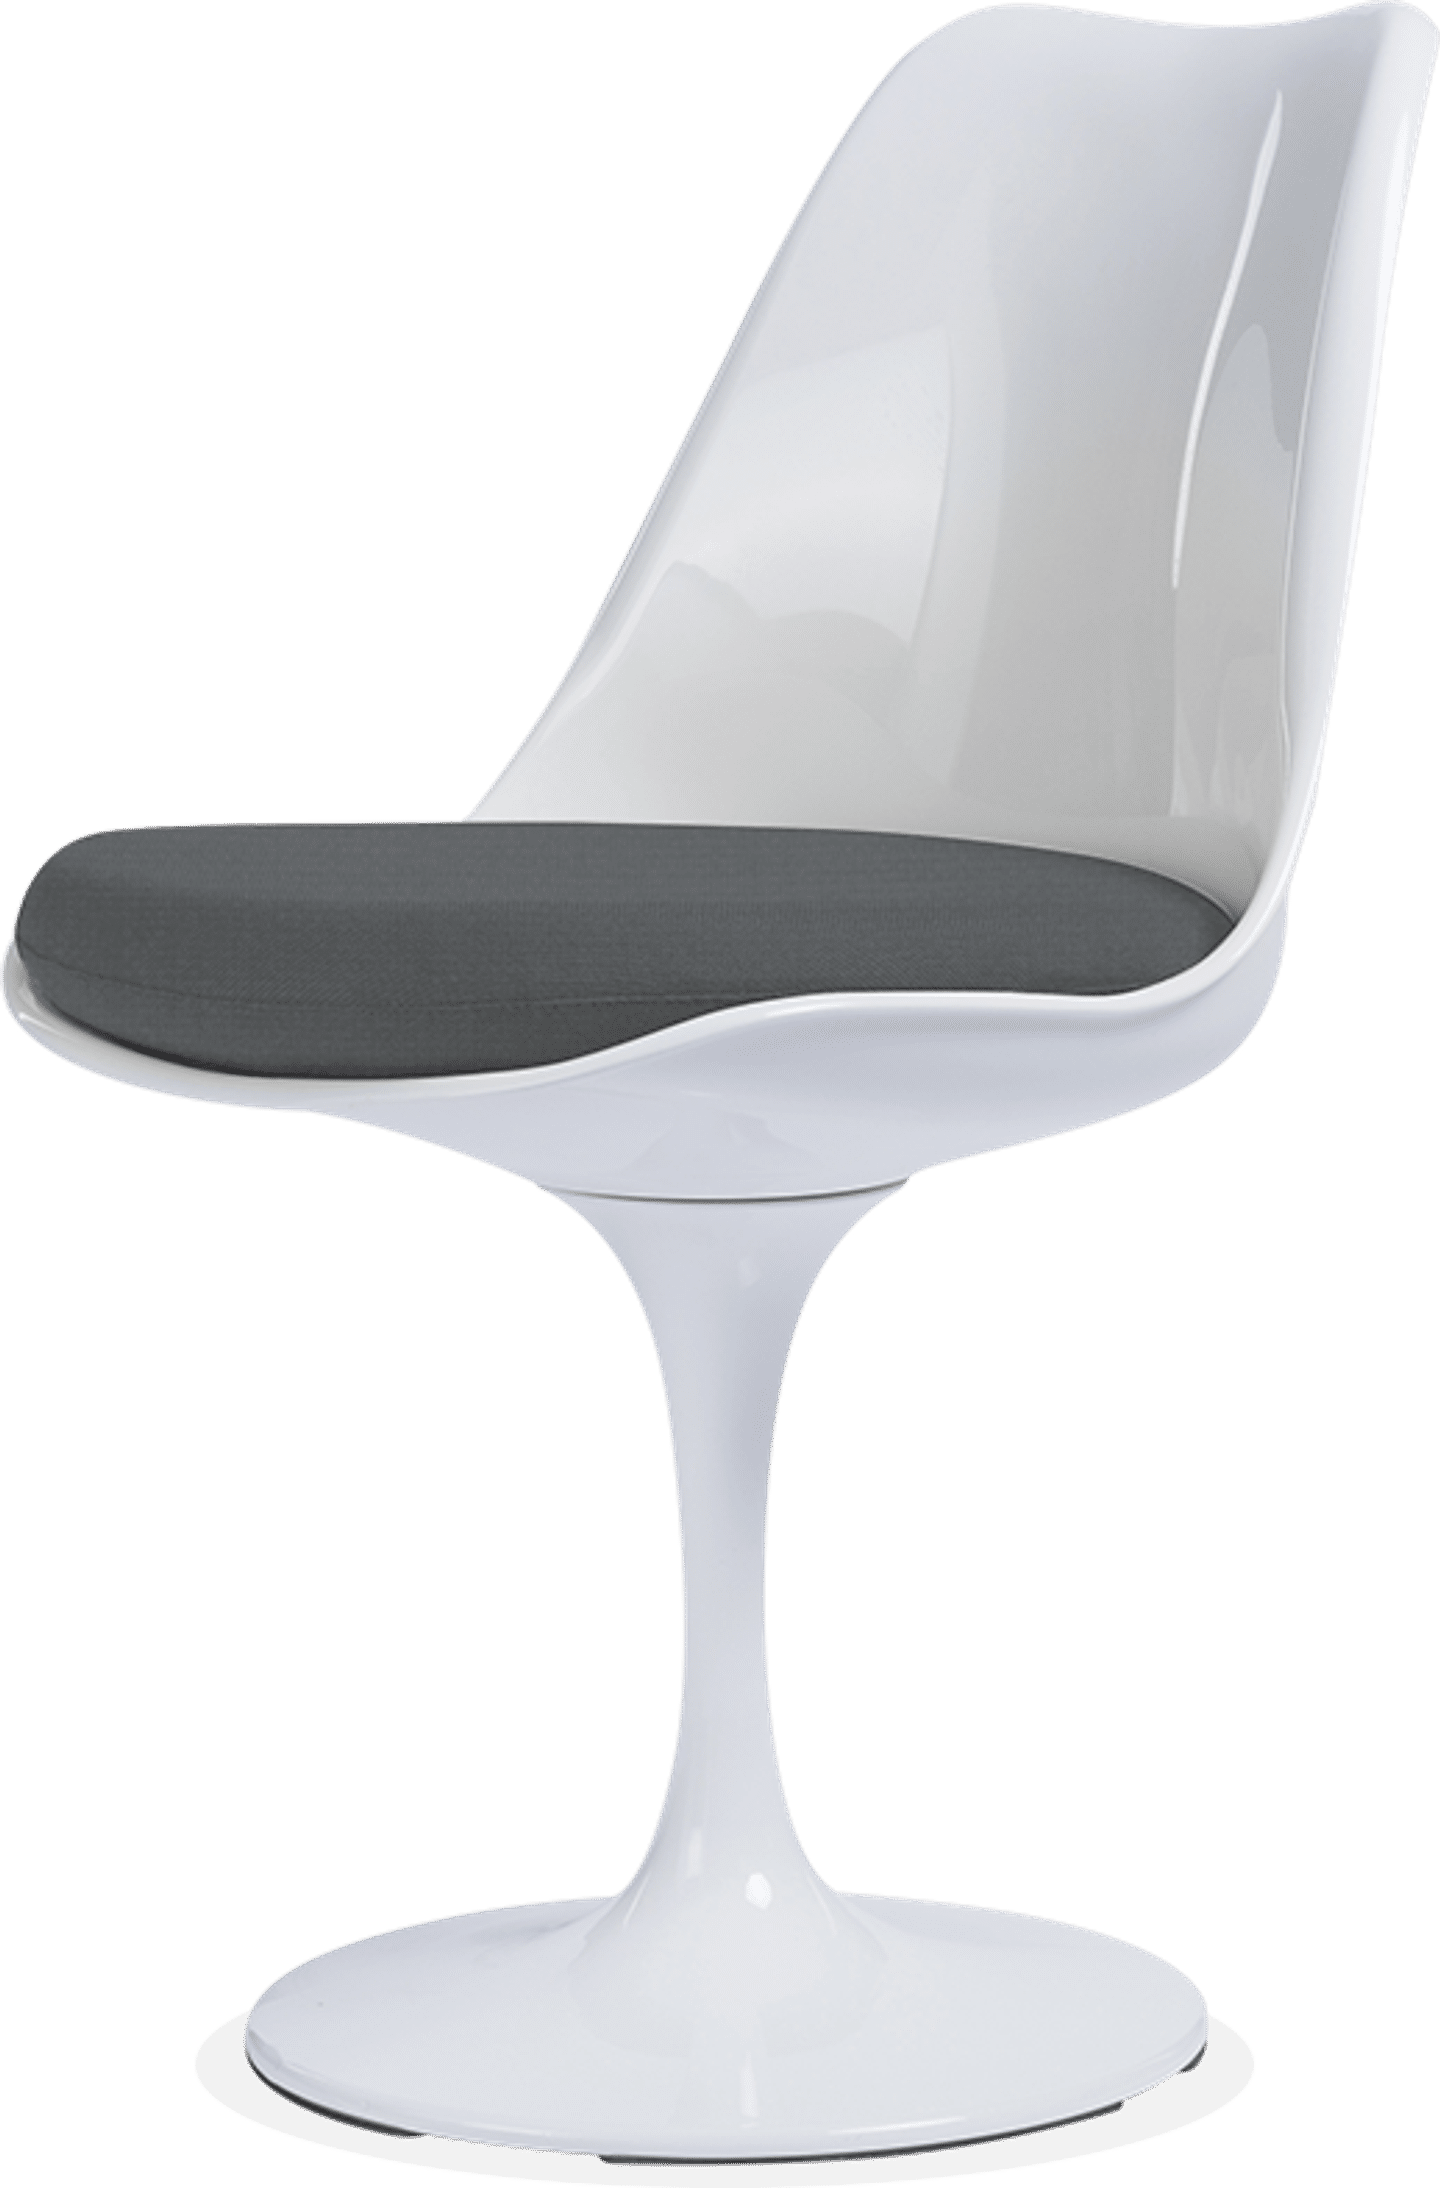 Chaise tulipe Charcoal Grey image.